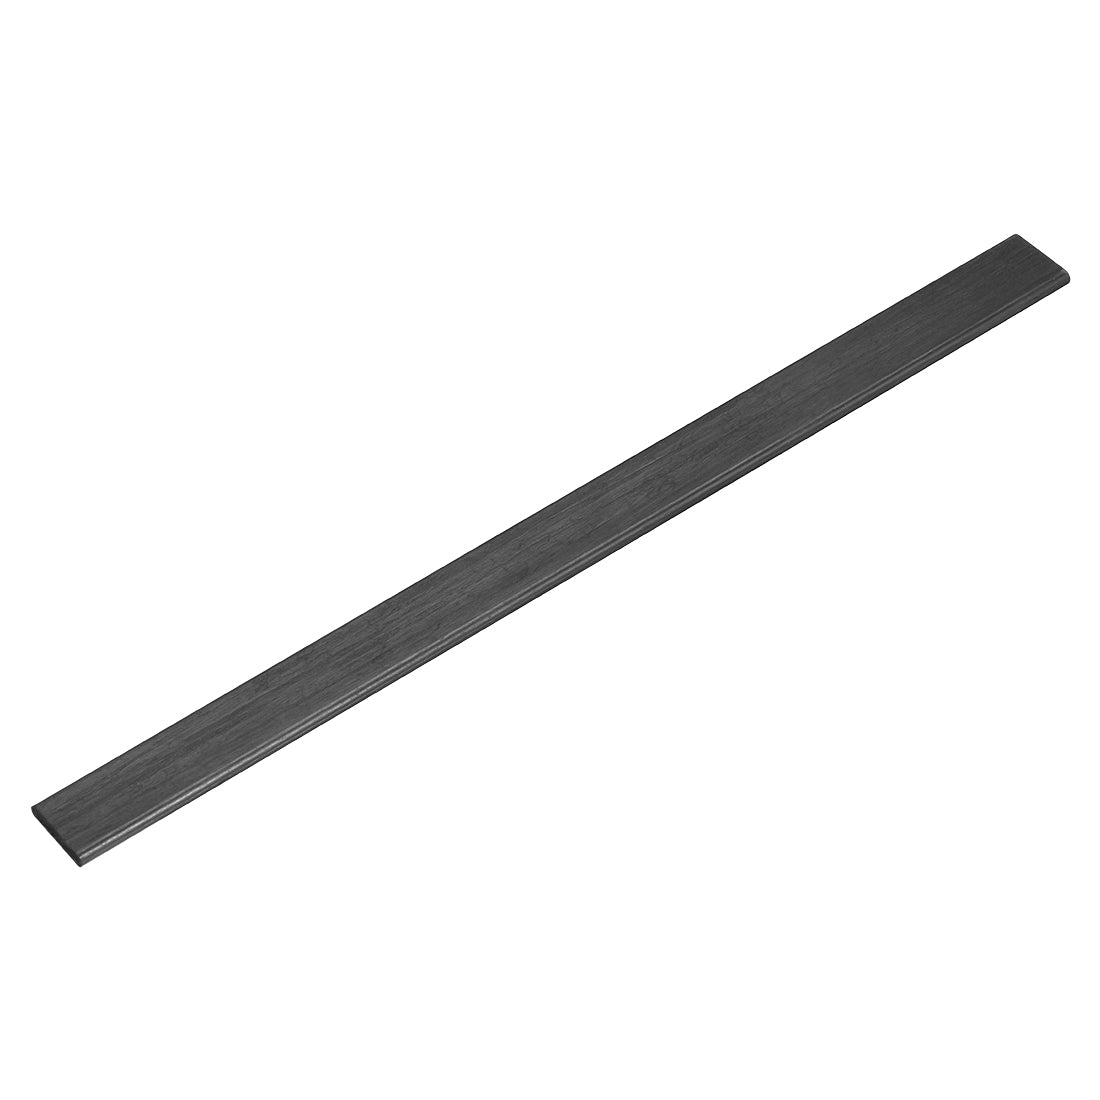 uxcell Uxcell Carbon Fiber Strip Bars 3x15mm 400mm Length Pultruded Carbon Fiber Strips for Kites, RC Airplane 1 Pcs